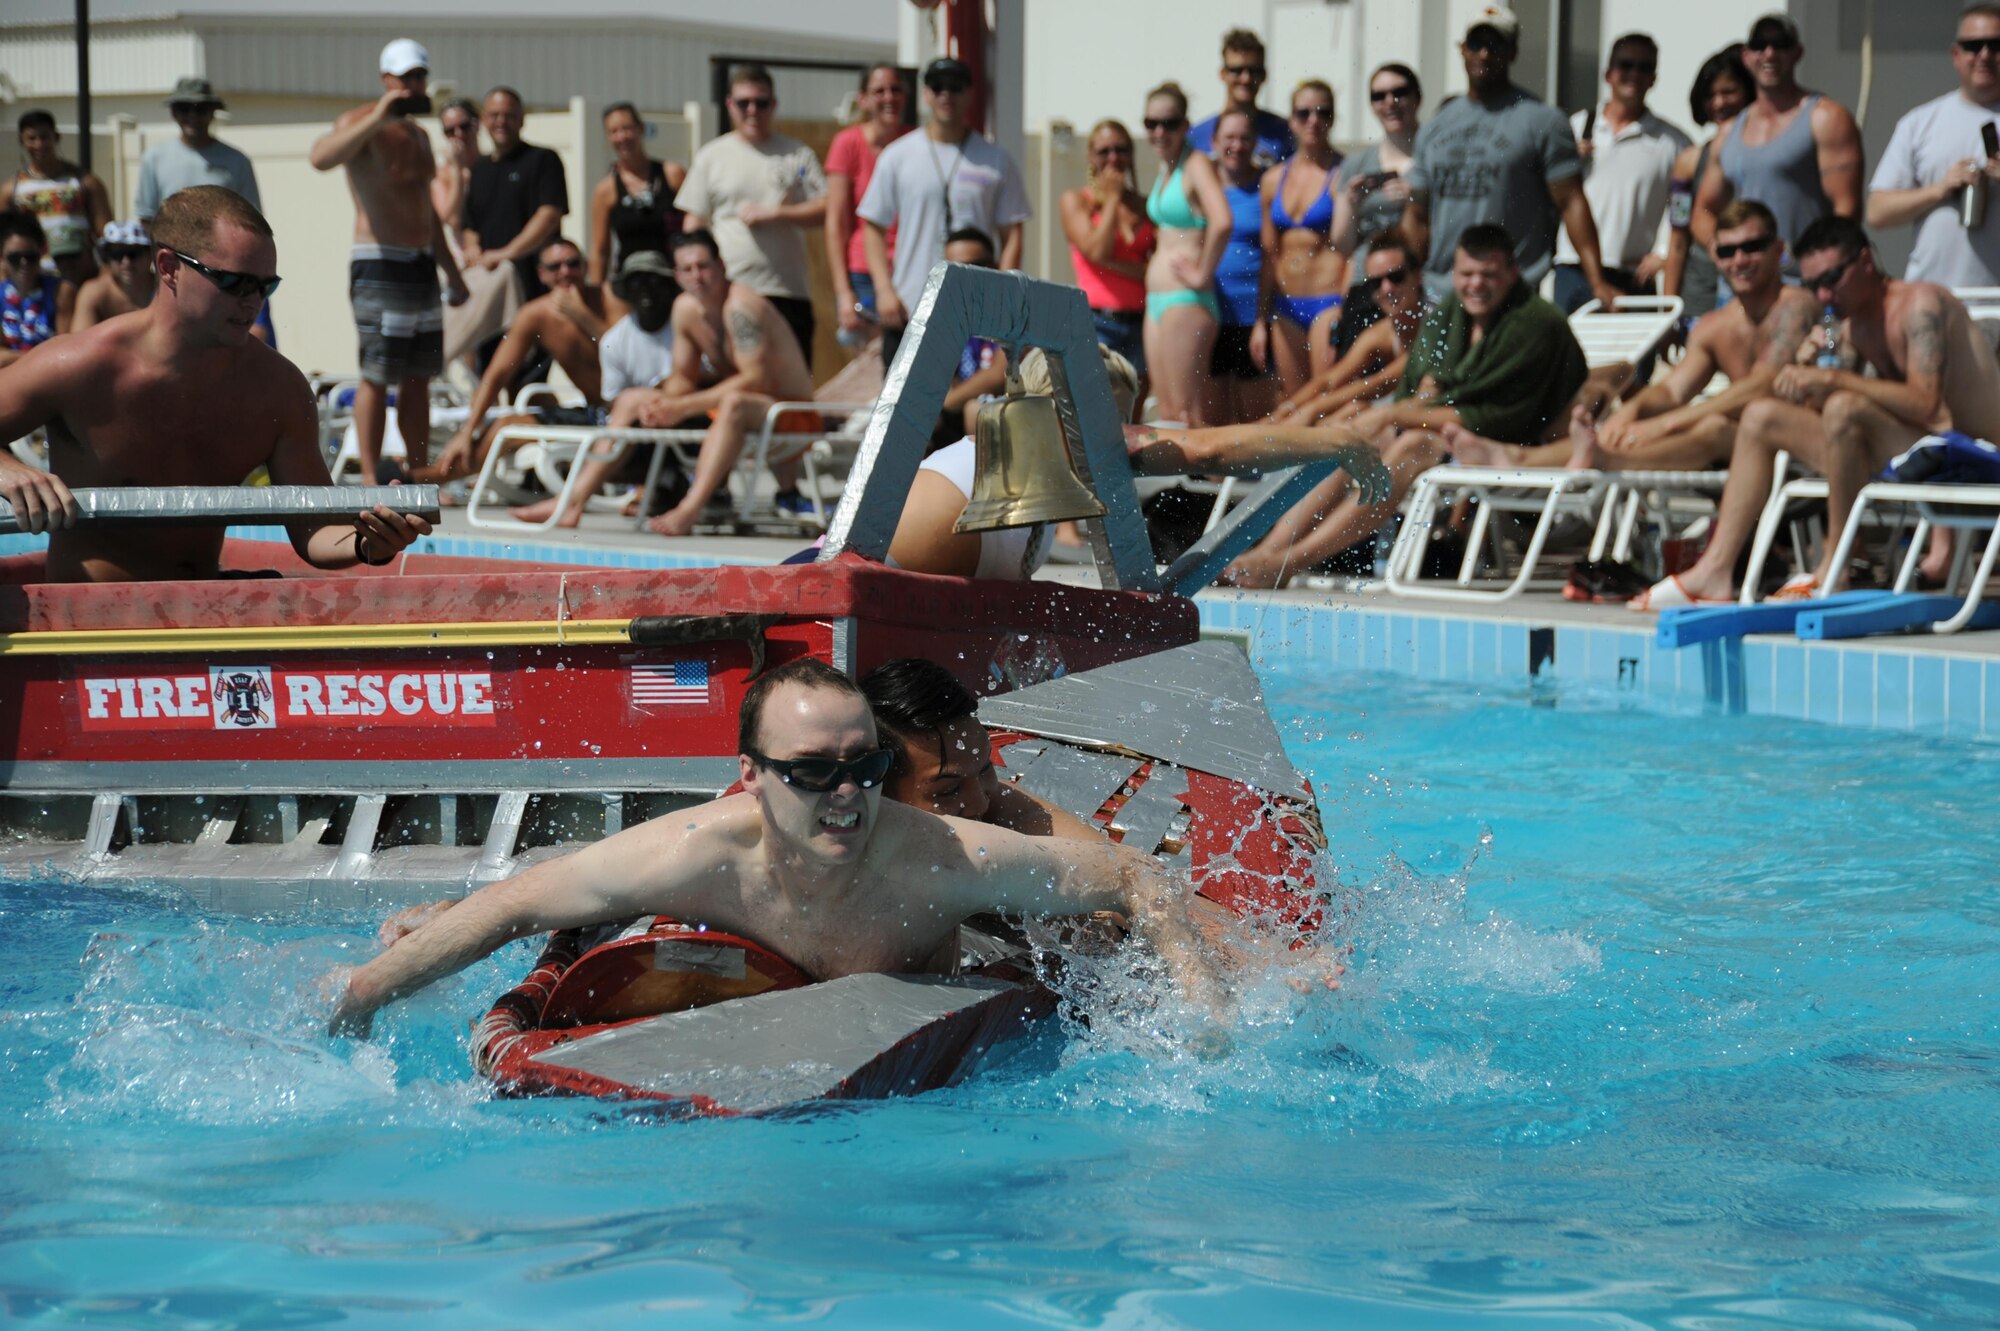 Capt. Robert Klingensmith, front, and Senior Airman Kimrussel Pascual from the 46th Expeditionary Reconnaissance Squadron fight to the finish in their boat “Devil’s Dream” against the Fire Department at an undisclosed location in Southwest Asia, May 29, 2016. Seven teams competed for the fastest time and most creative design in the cardboard-boat regatta during the event Rockfest. (U.S. Air Force photo by Senior Airman Zachary Kee)